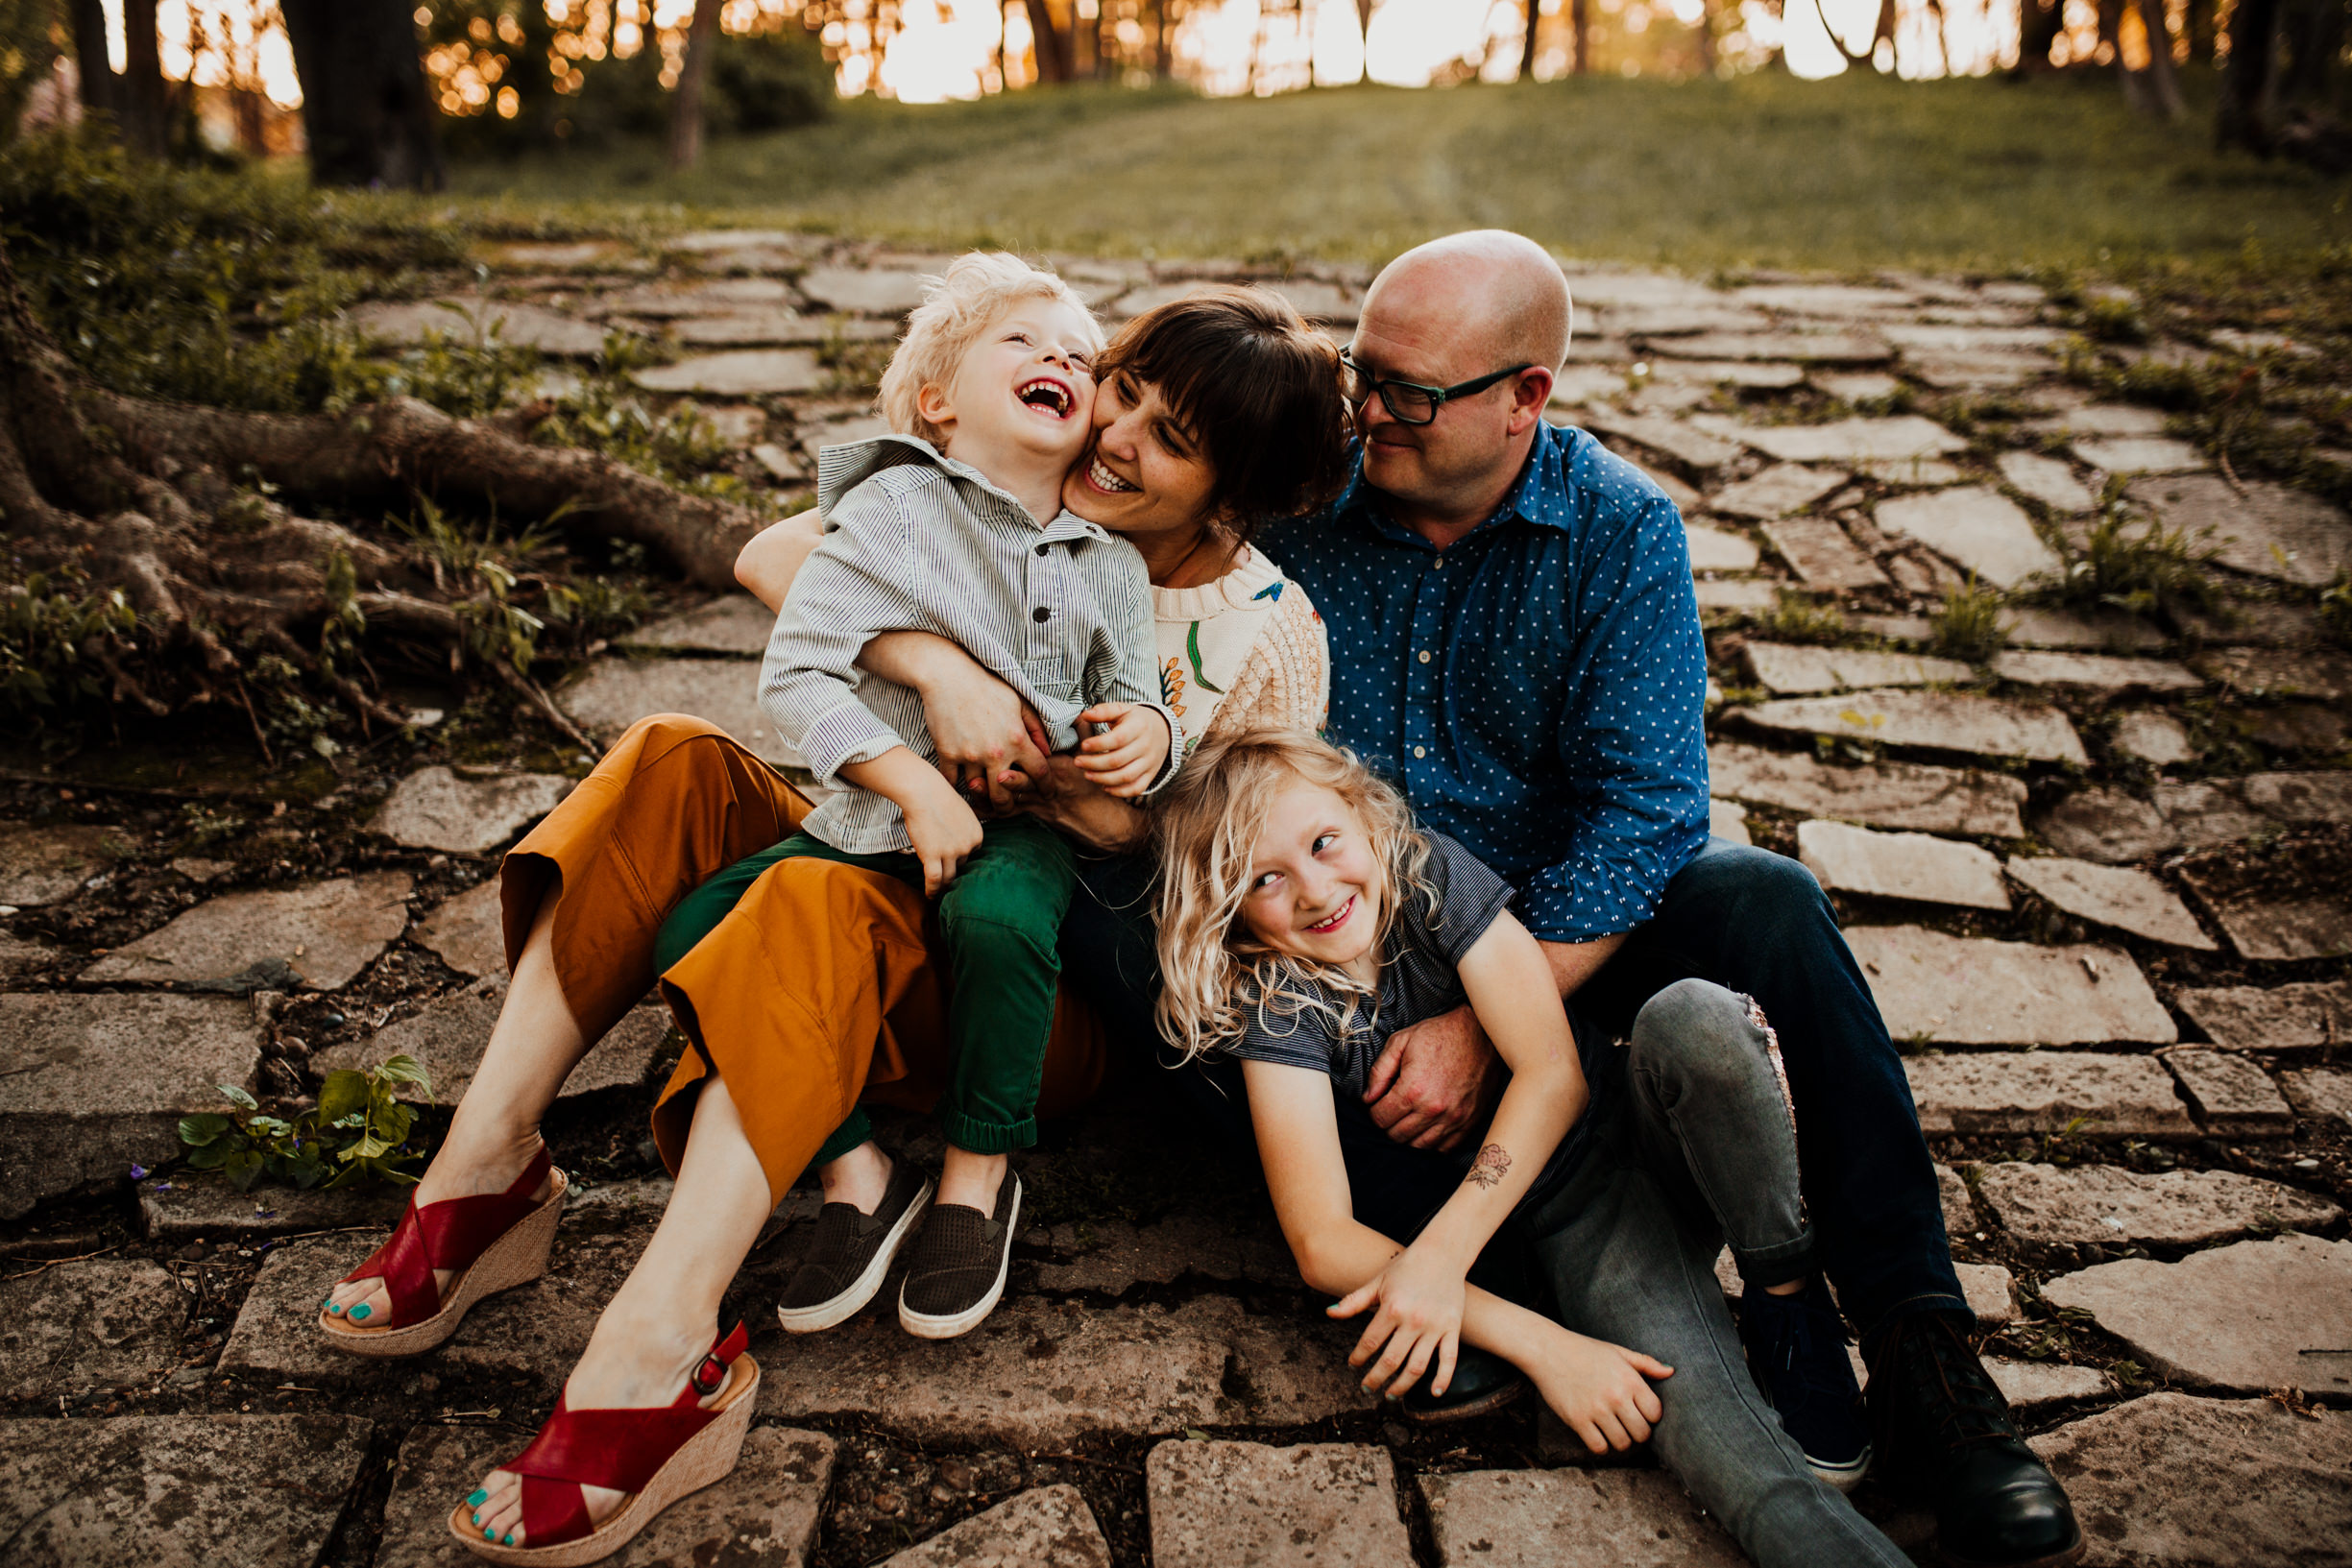 louisville-family-photographer-crystal-ludwick-photo (3 of 46).jpg